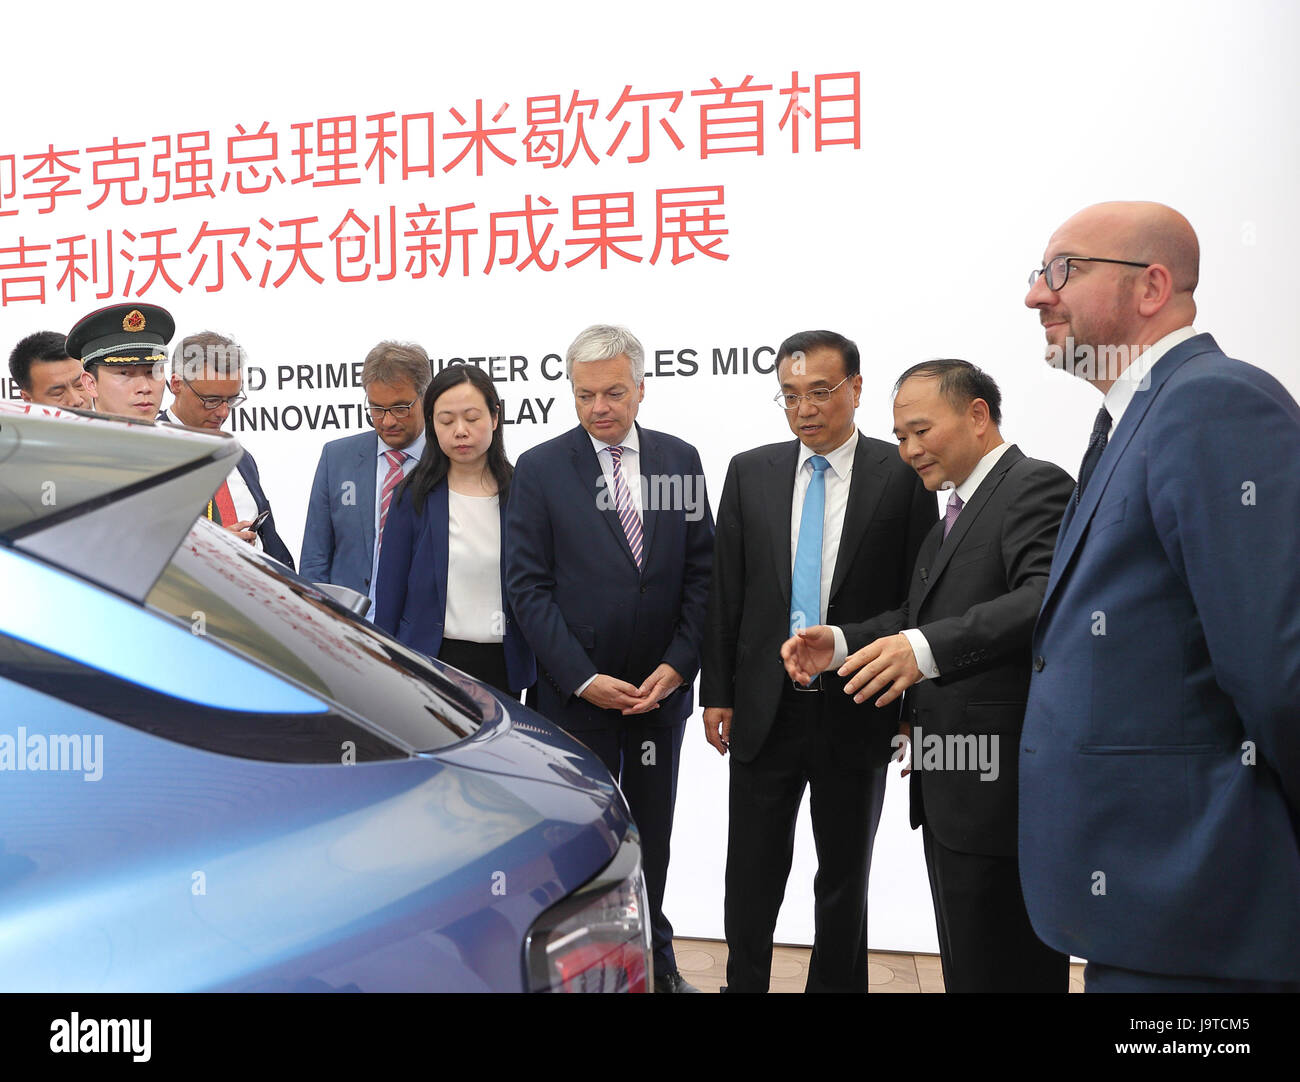 Brussels, Belgium. 2nd June, 2017. Chinese Premier Li Keqiang (3rd R) and Belgian Prime Minister Charles Michel (1st R) visit 'Geely-Volvo Innovation Display' in Brussels, Belgium, June 2, 2017. Credit: Wang Ye/Xinhua/Alamy Live News Stock Photo